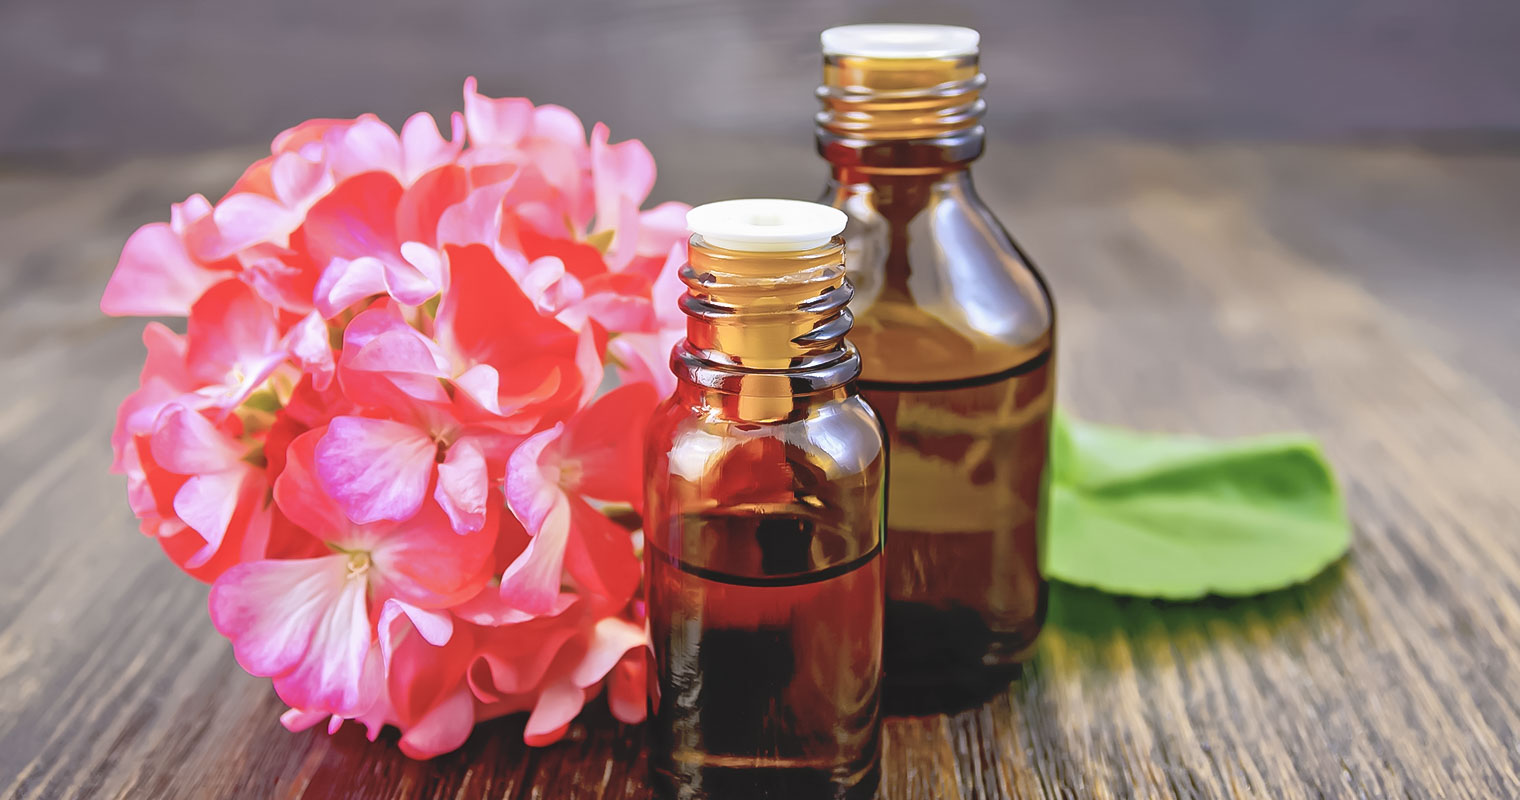 2 bottles of Geranium oil in front of Geranium flower on a table